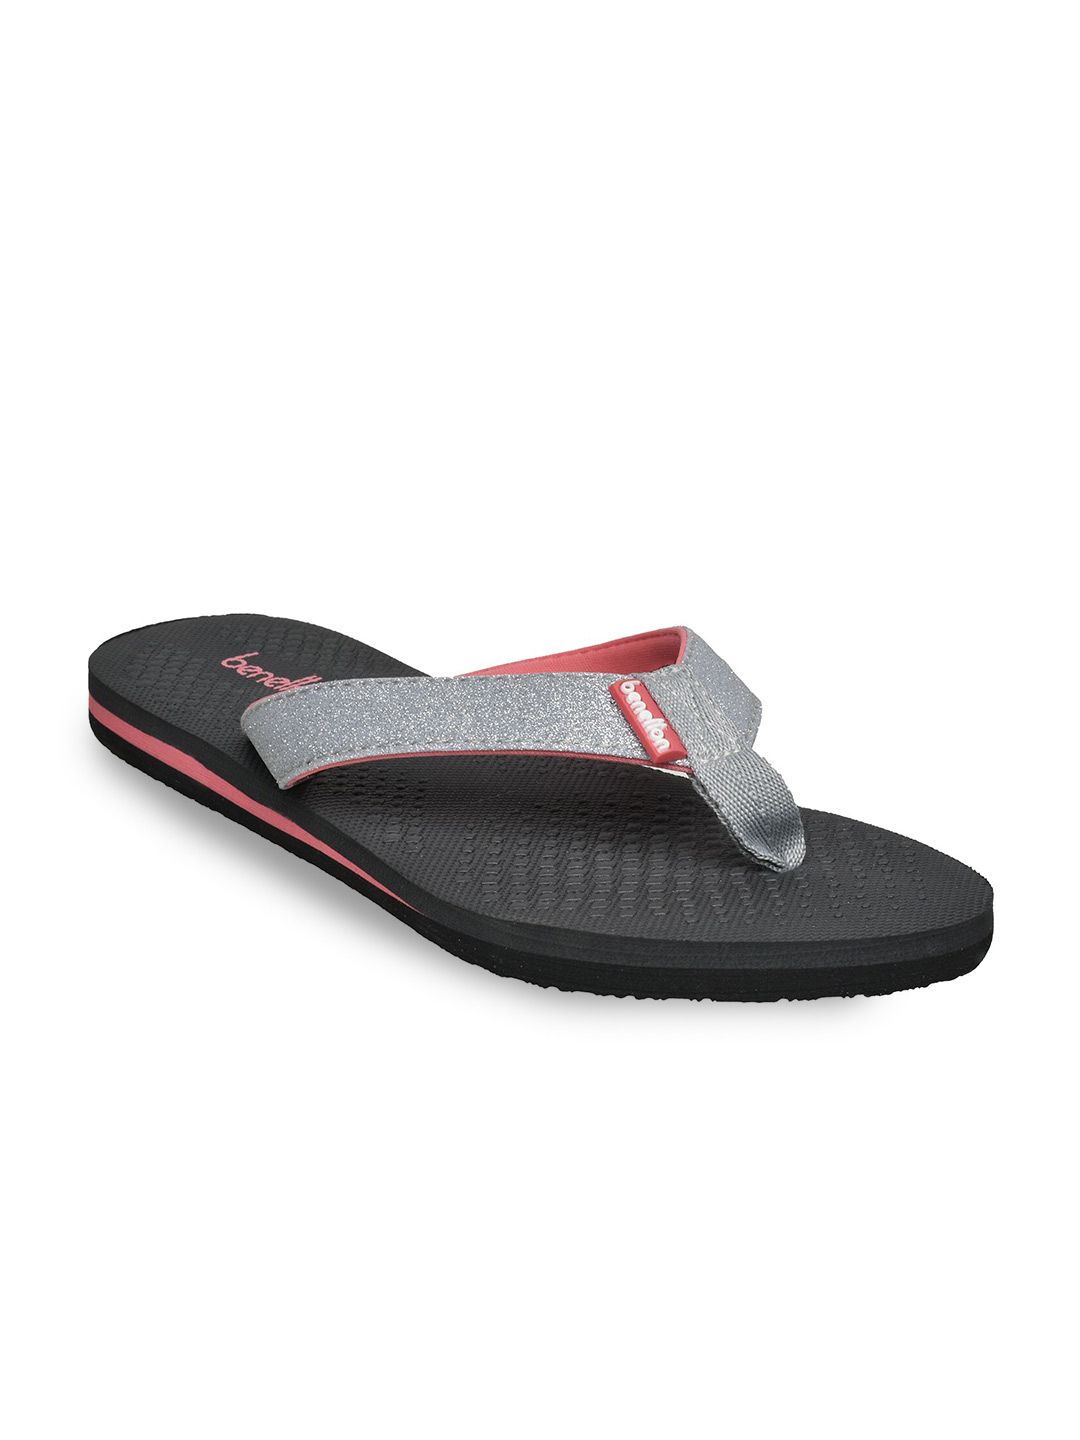 United Colors of Benetton Women Grey & Black Thong Flip-Flops Price in India